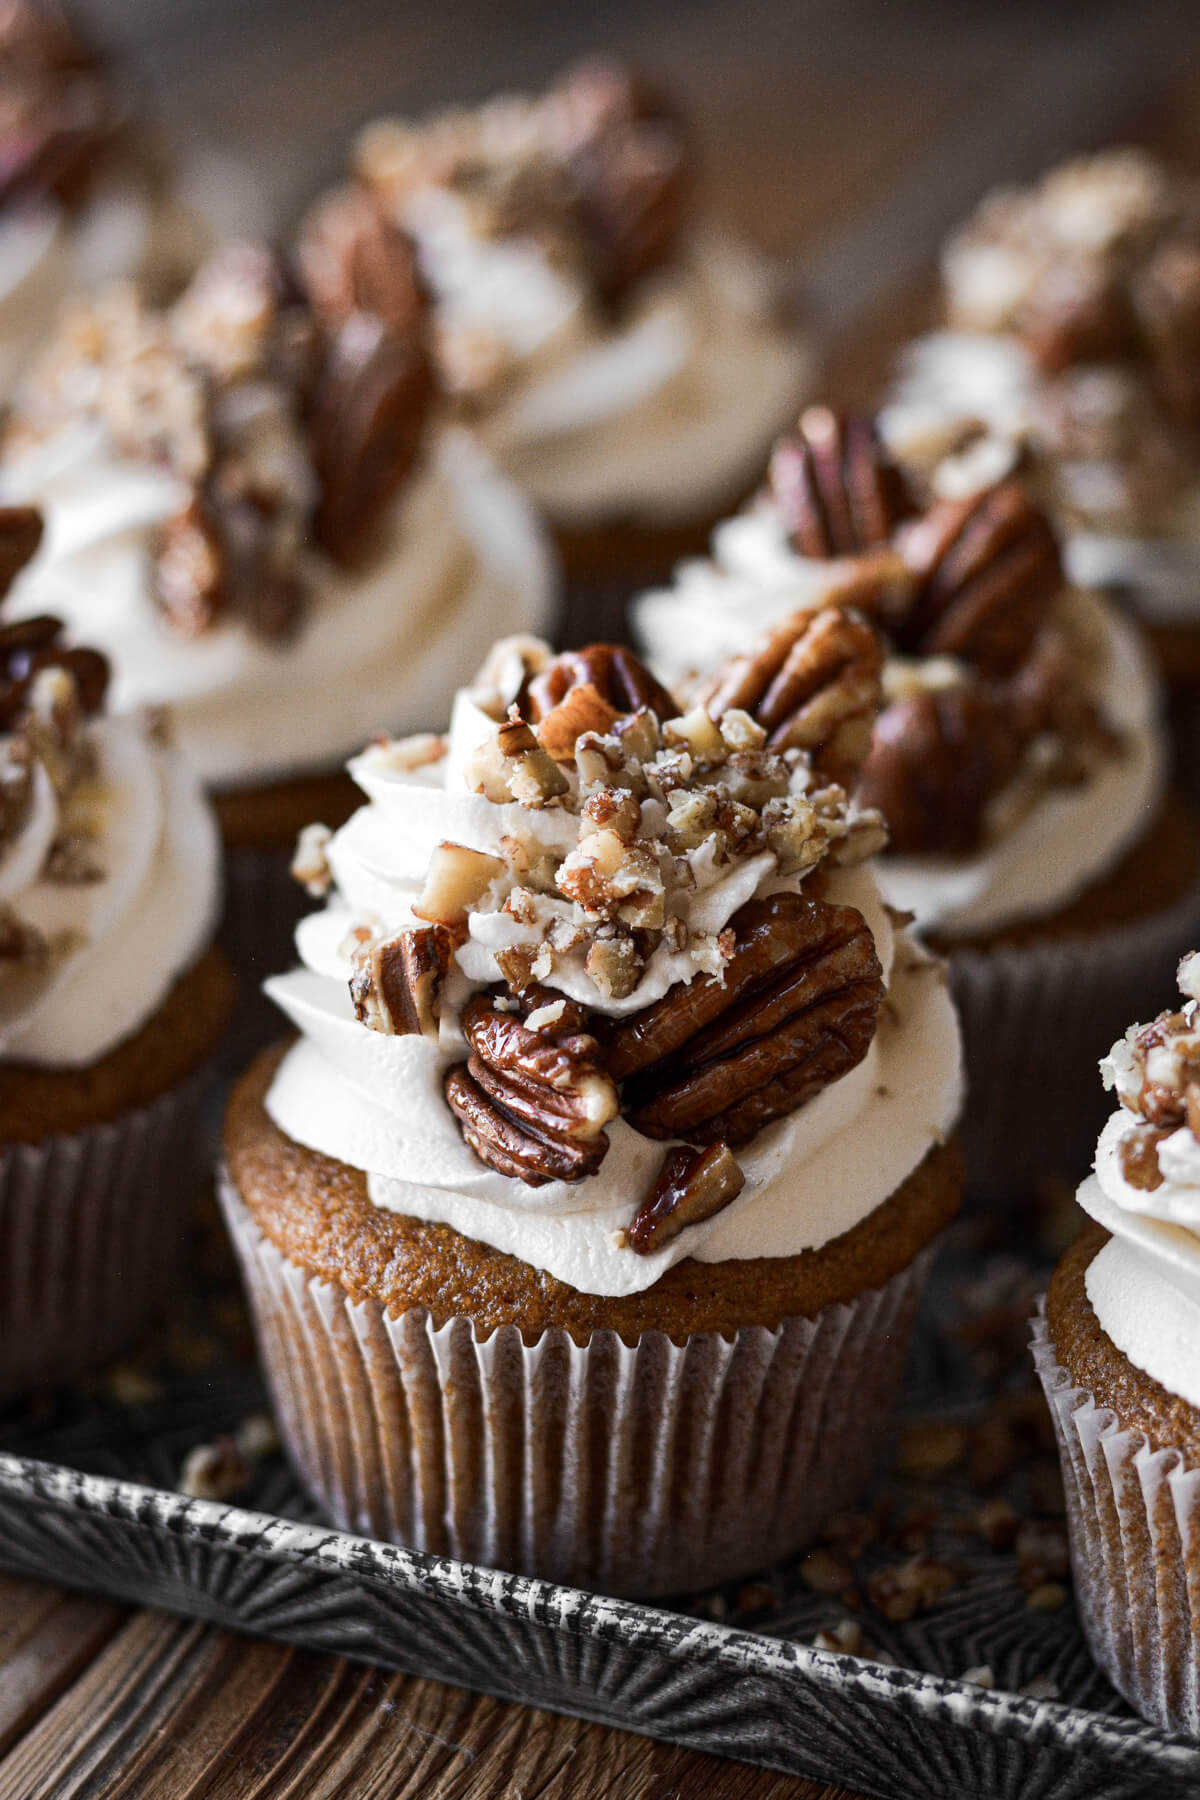 Sweet potato cupcakes with marshmallow frosting and maple glazed pecans.